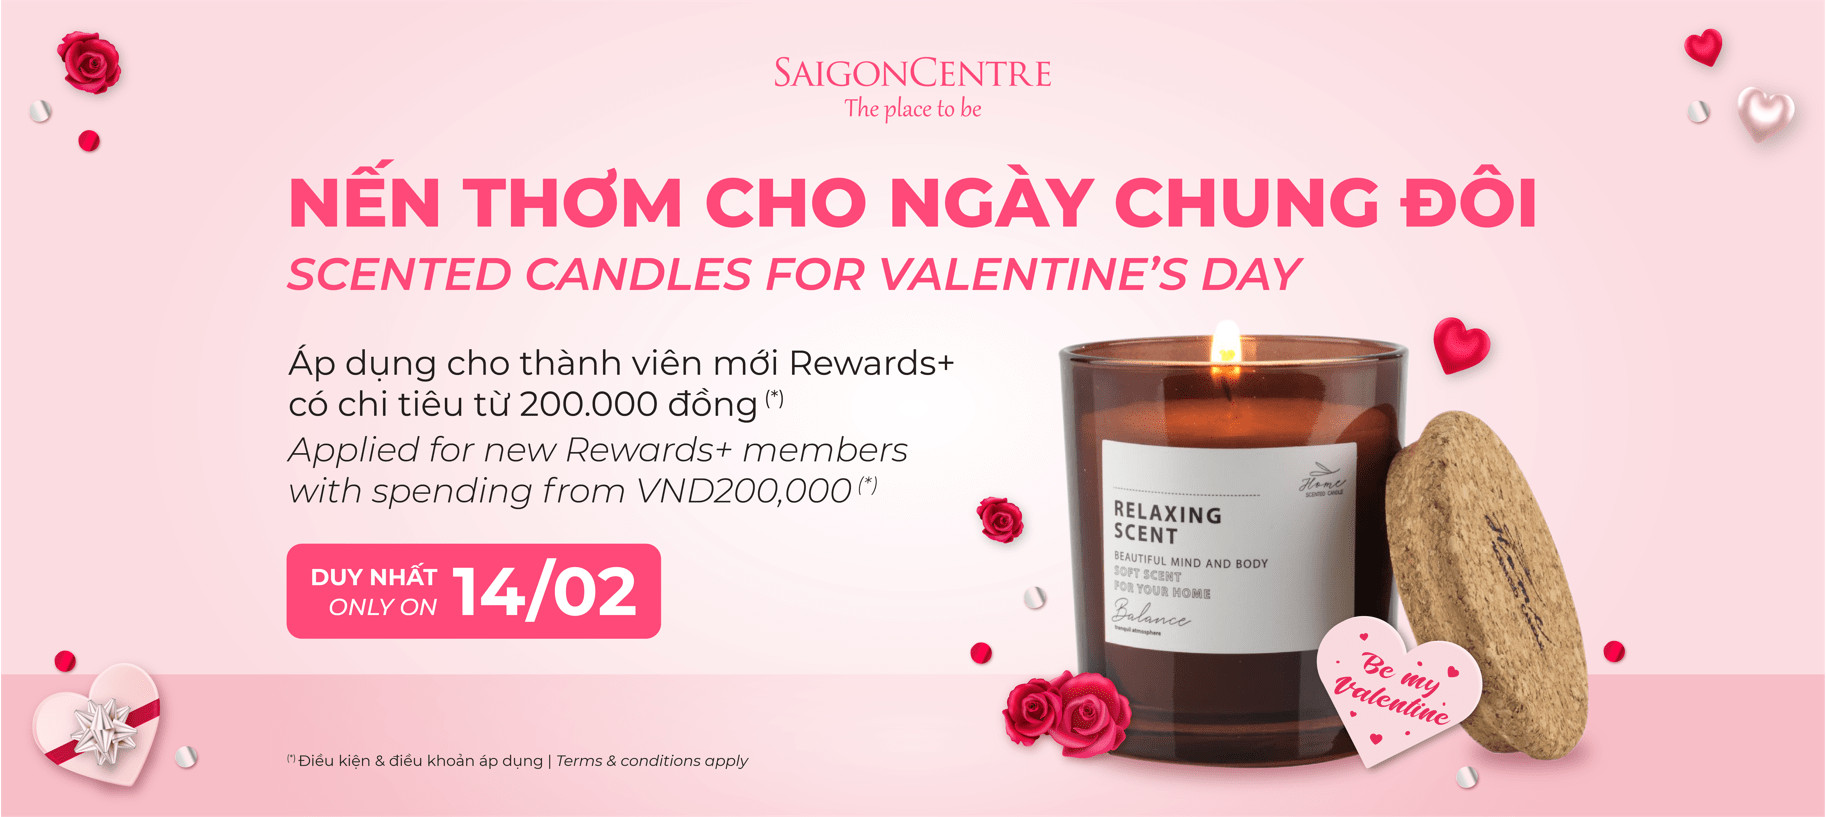 SCENTED CANDLES FOR VALENTINE'S DAY